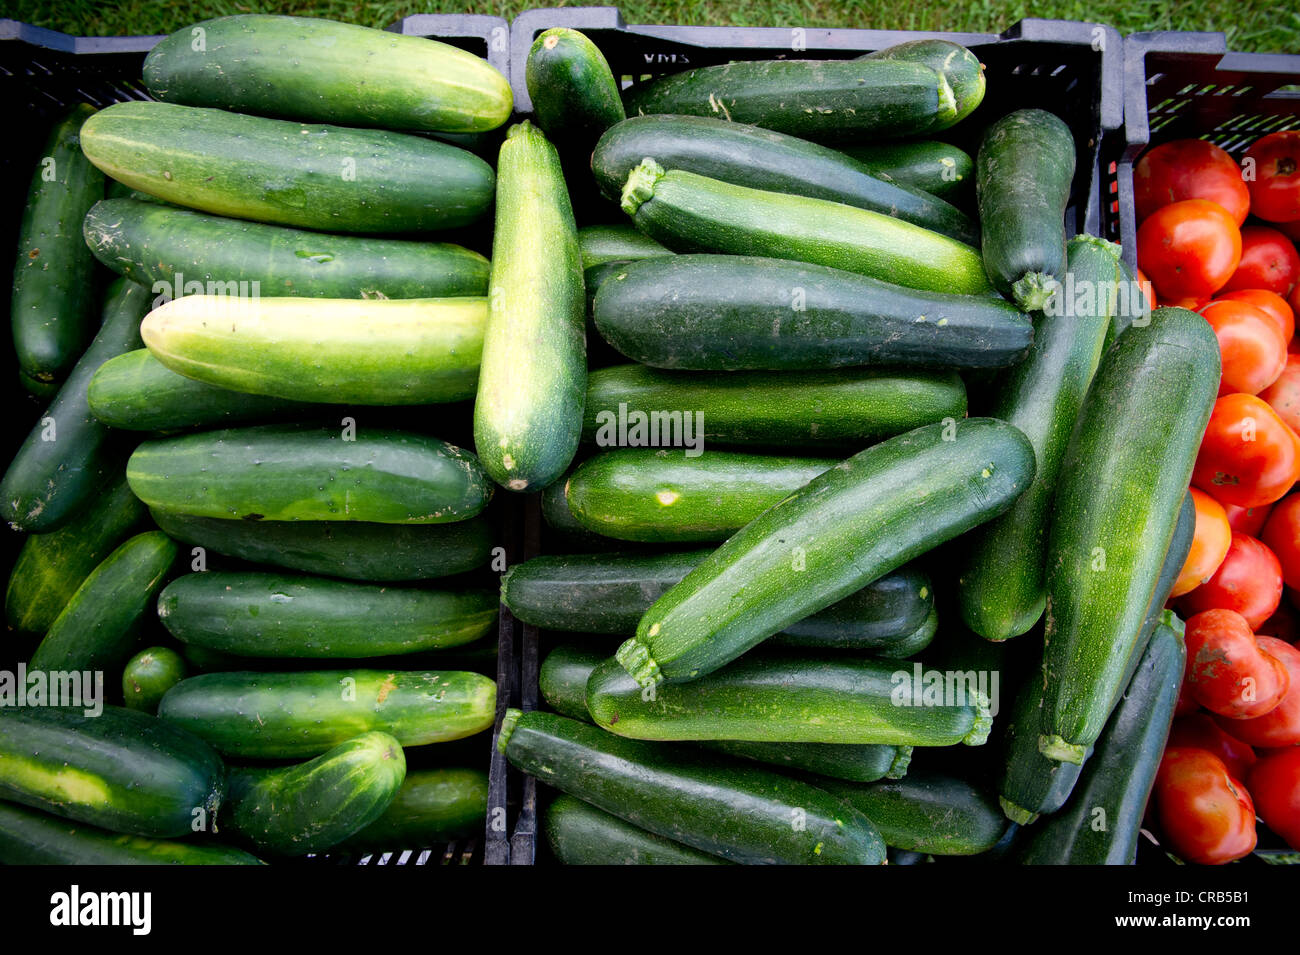 crates of cucumbers at a farmers market Stock Photo